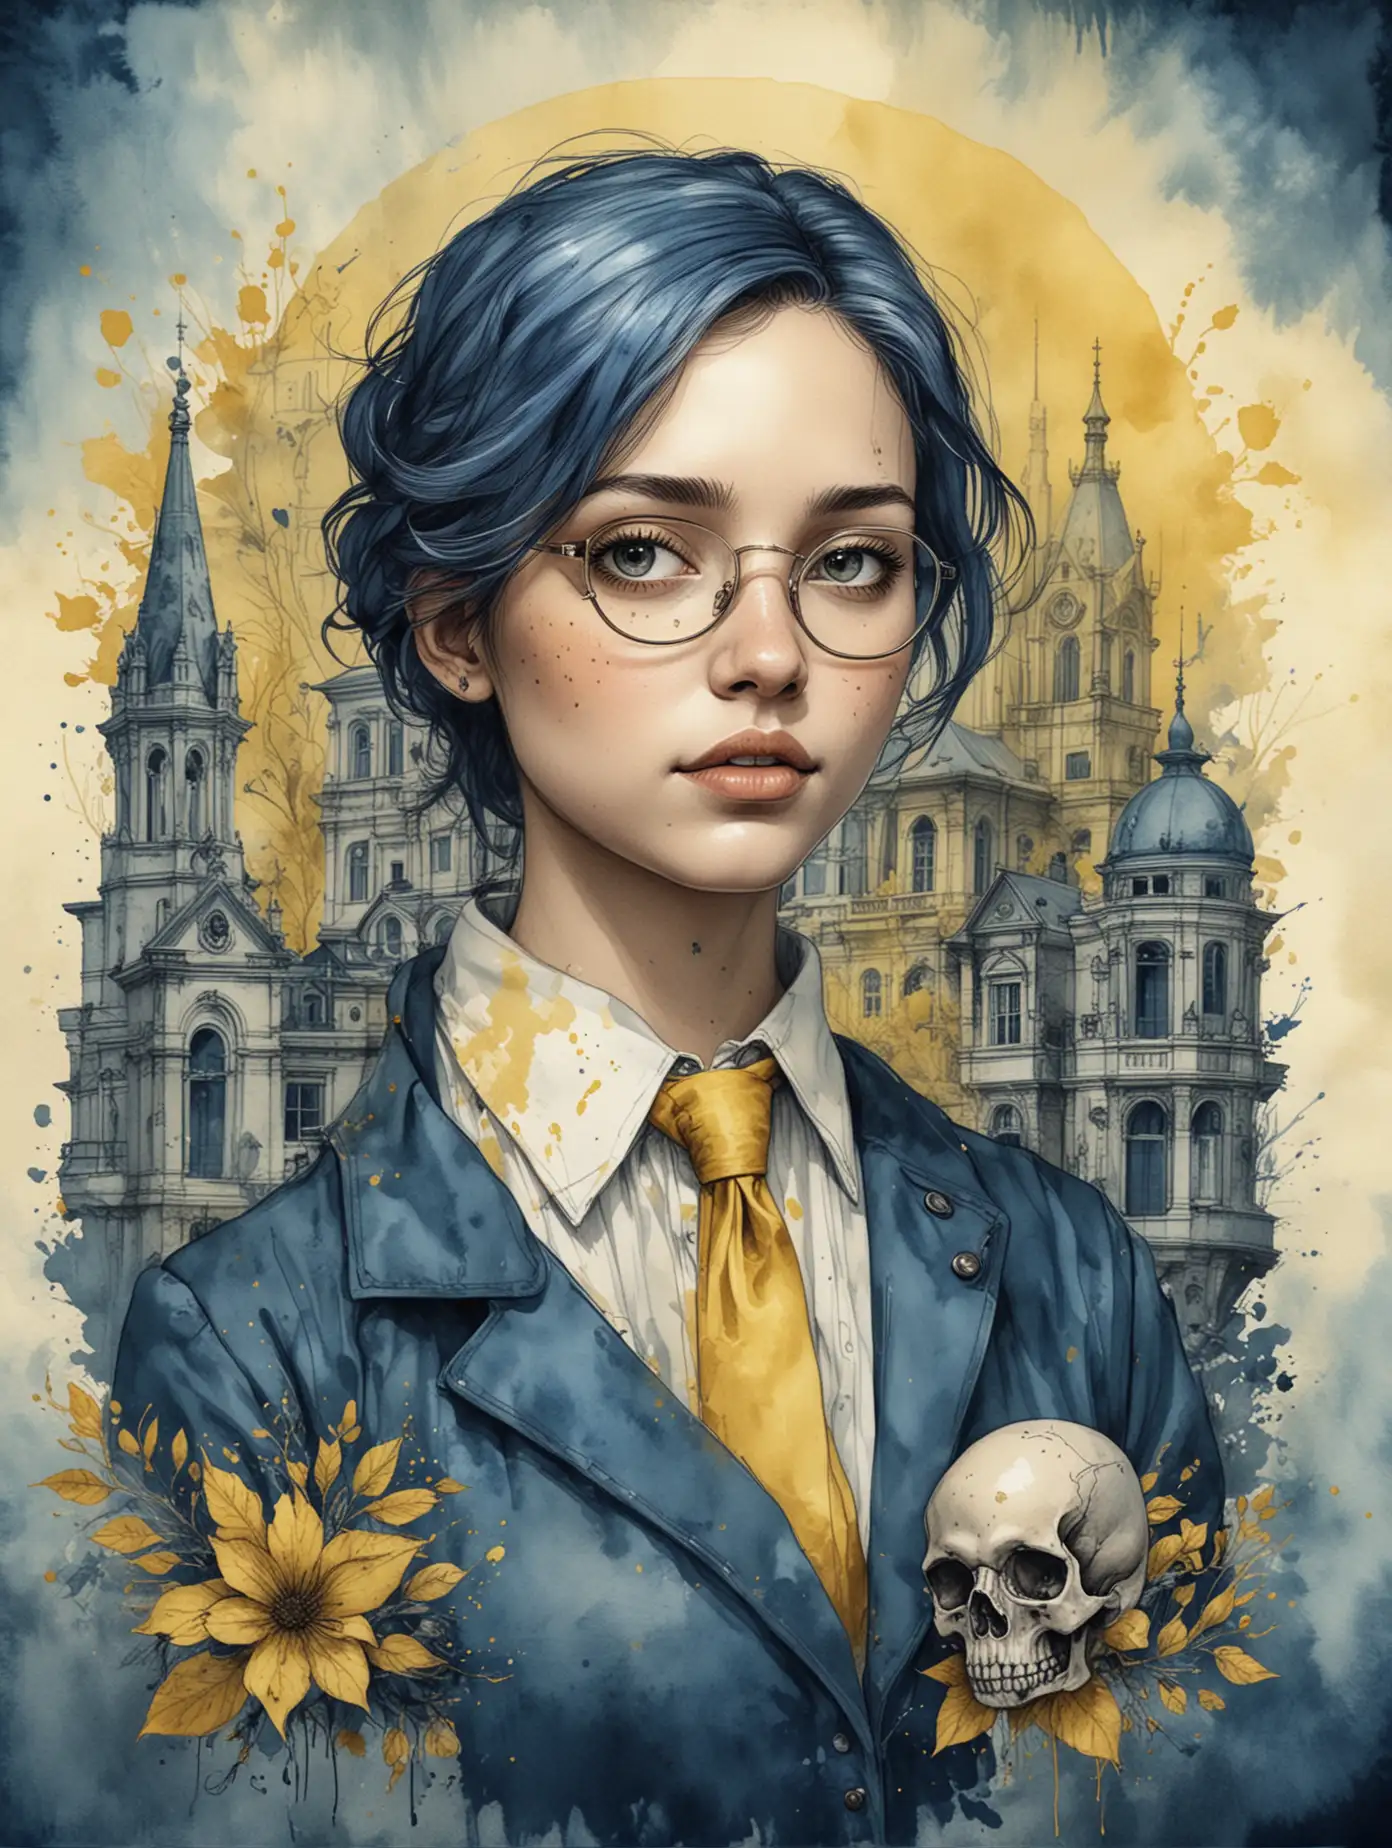 Dark Academia Digital Illustration Vintage Style Graphic Art in Yellow and Blue Watercolor and Ink Wash